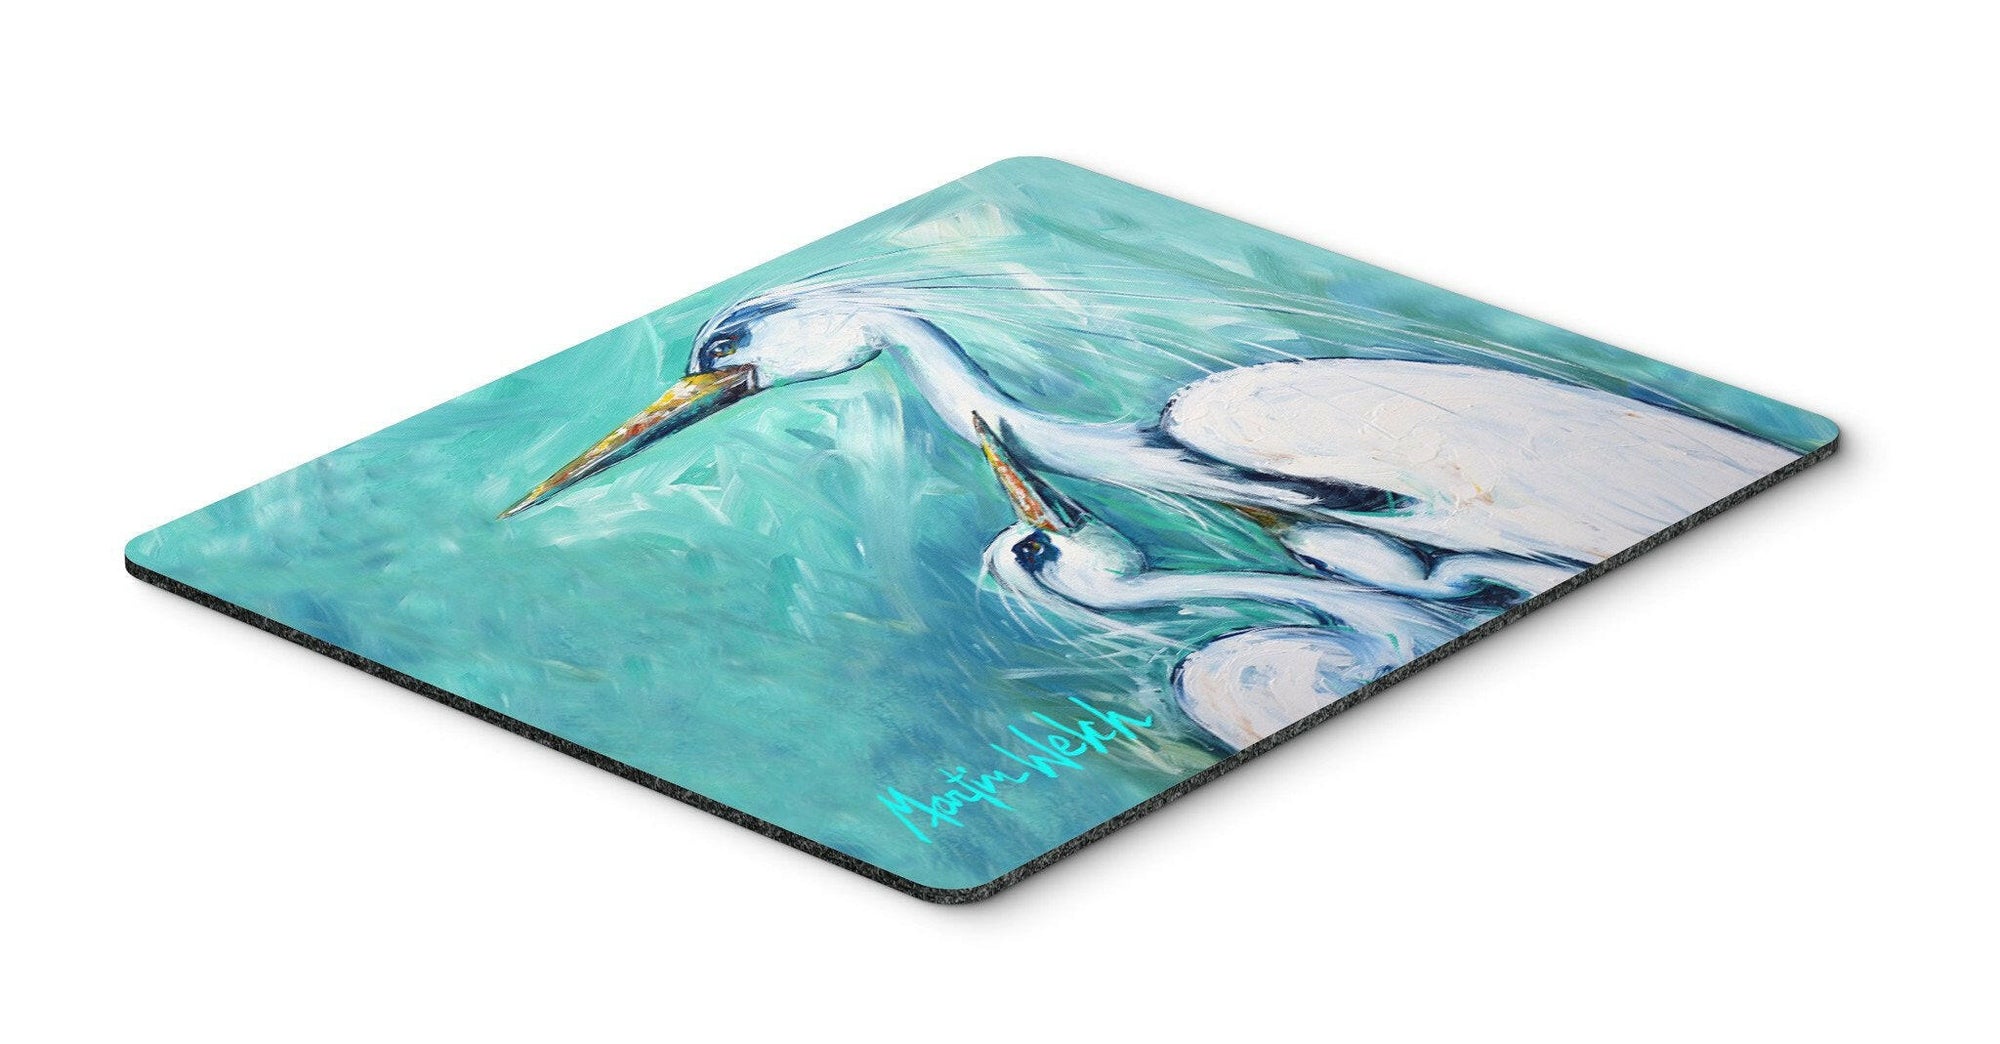 Mother's Love White Crane Mouse Pad, Hot Pad or Trivet MW1159MP by Caroline's Treasures